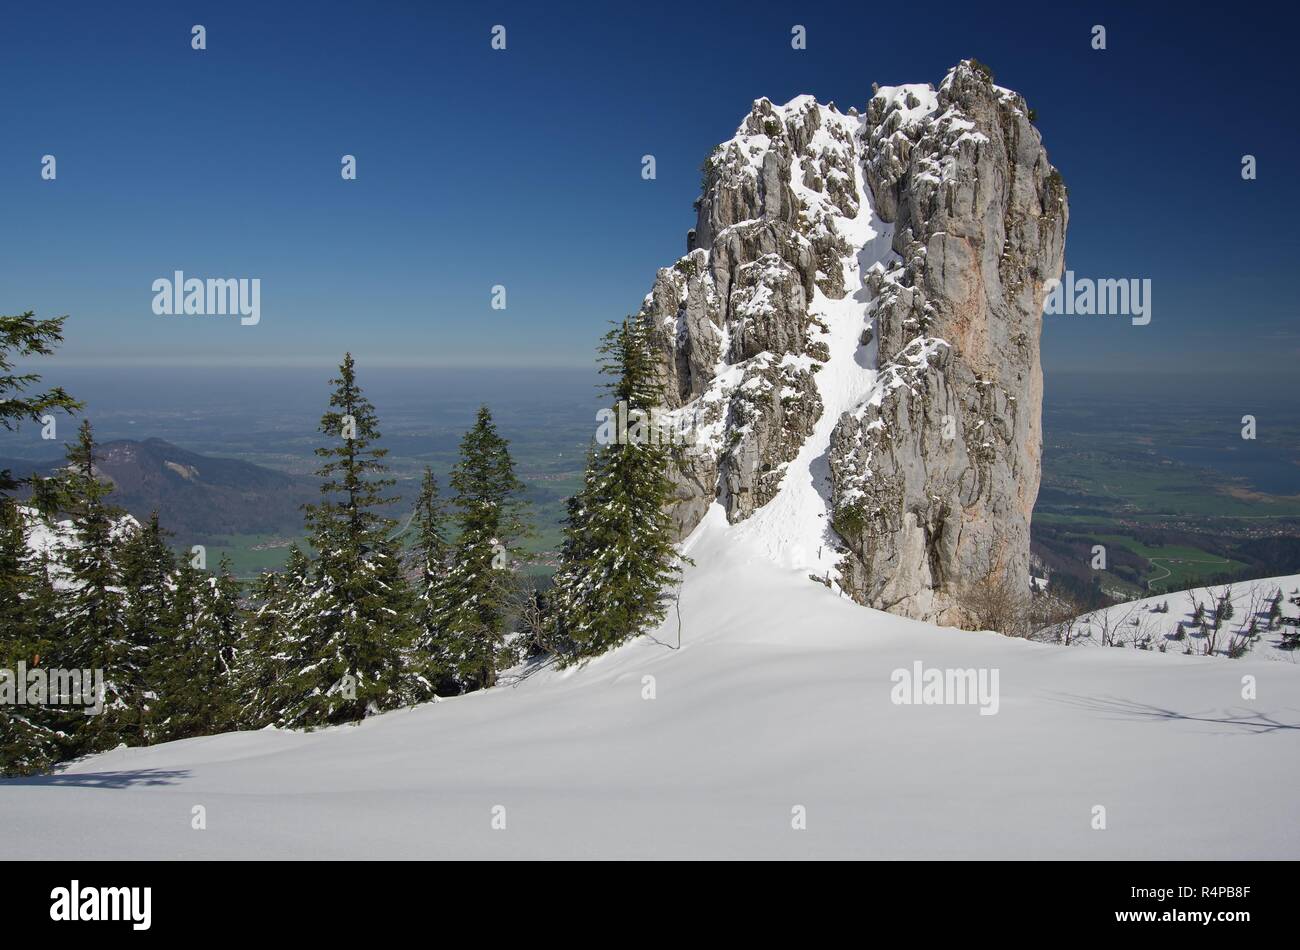 kampenwand,view from the snowy hiking trail on the rock tower,chiemgau,upper bavaria,southern germany Stock Photo